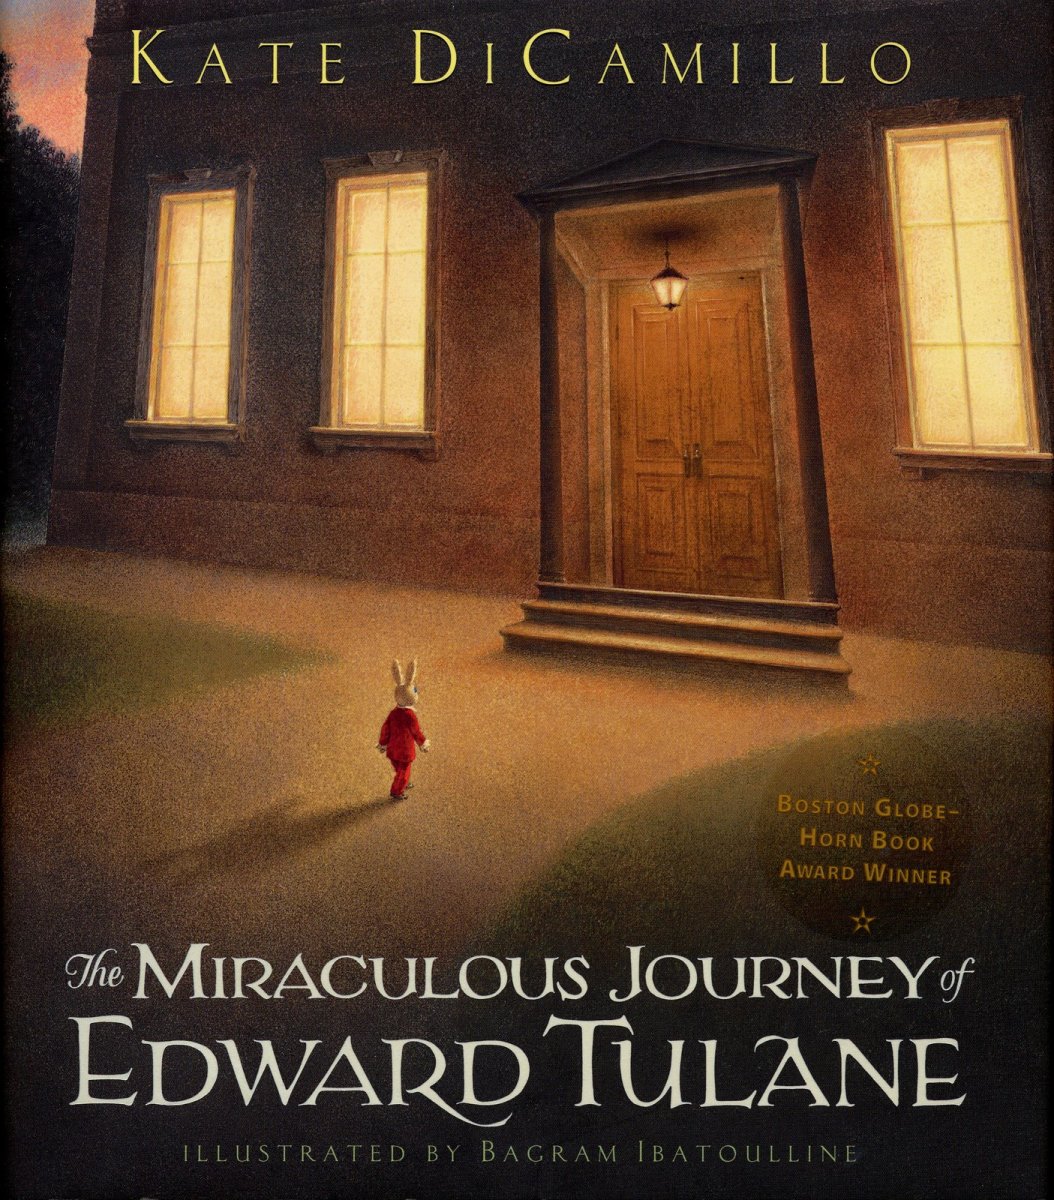 The Miraculous Journey of Edward Tulane- A Must Read for All Ages